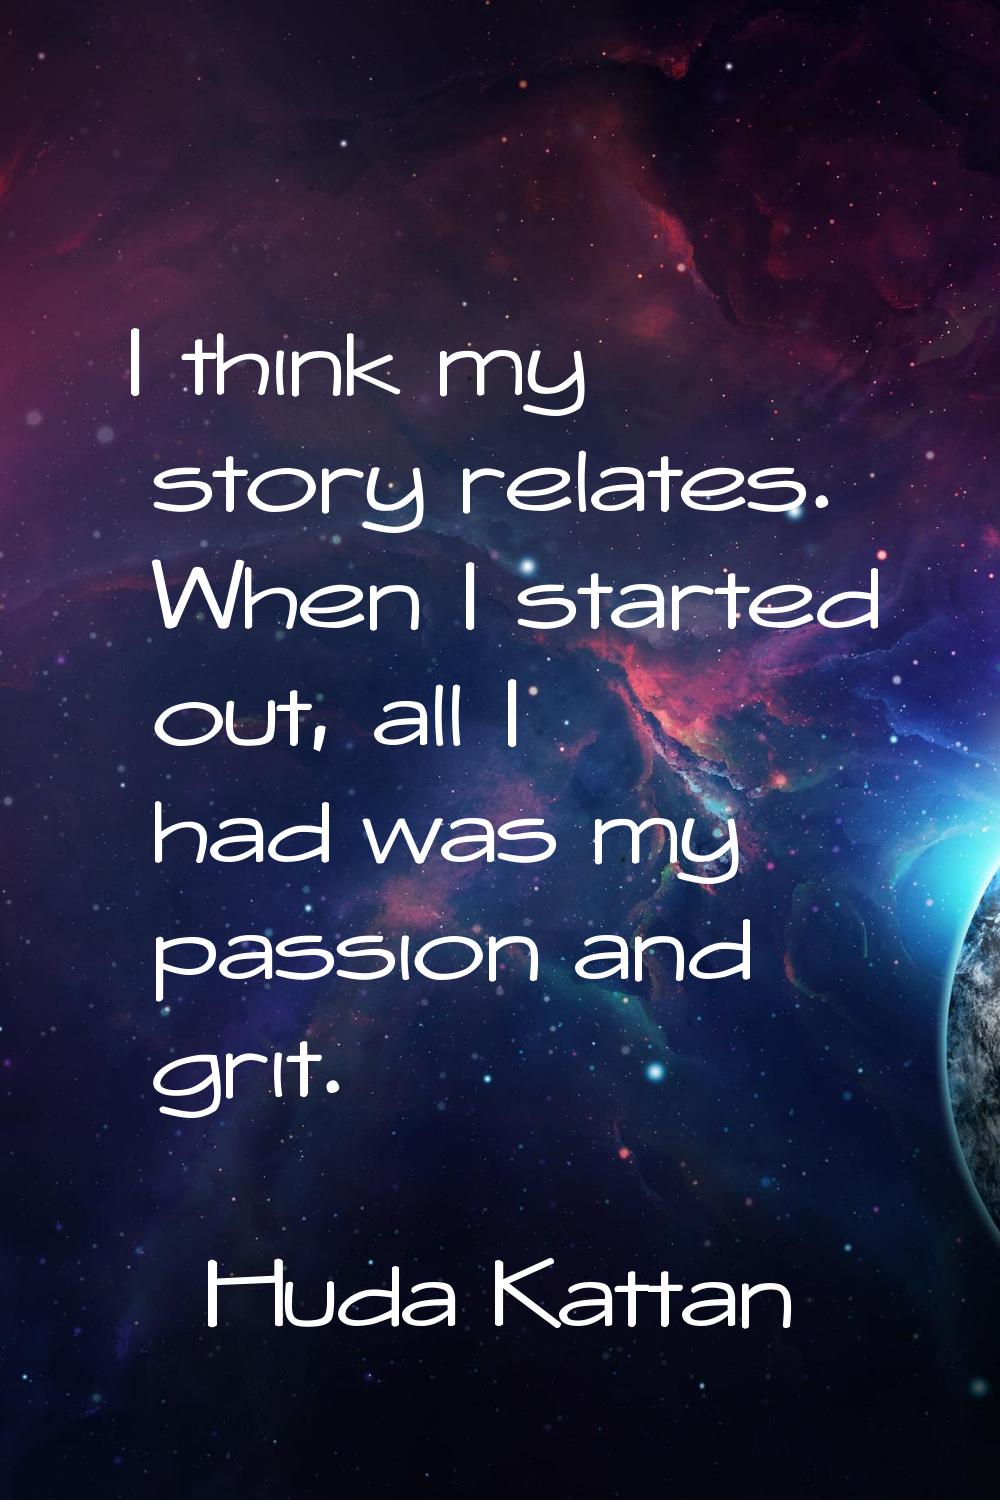 I think my story relates. When I started out, all I had was my passion and grit.